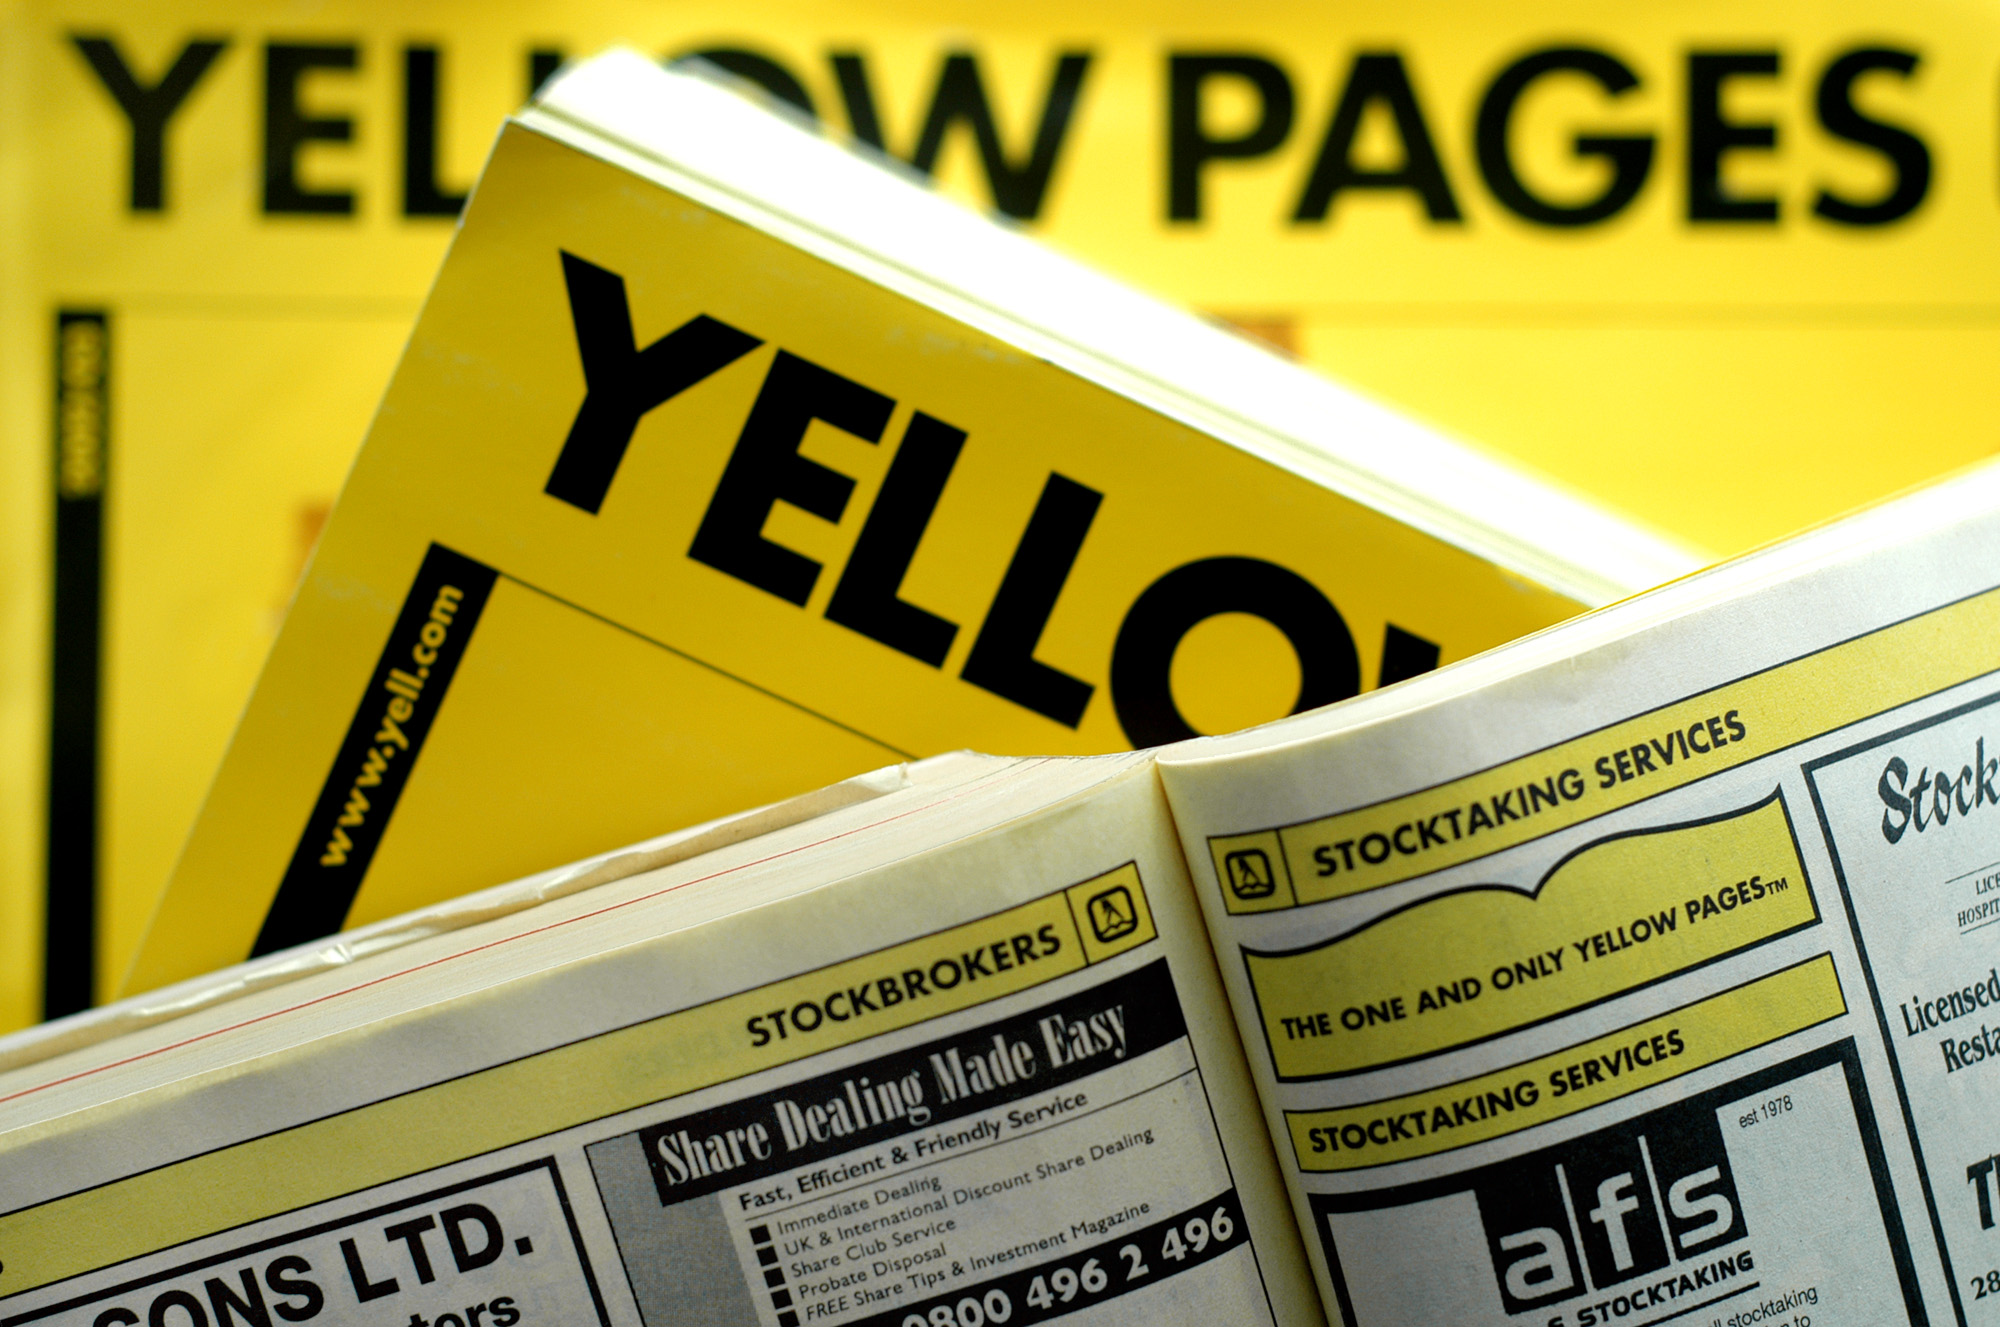 difference between white pages and yellow pages